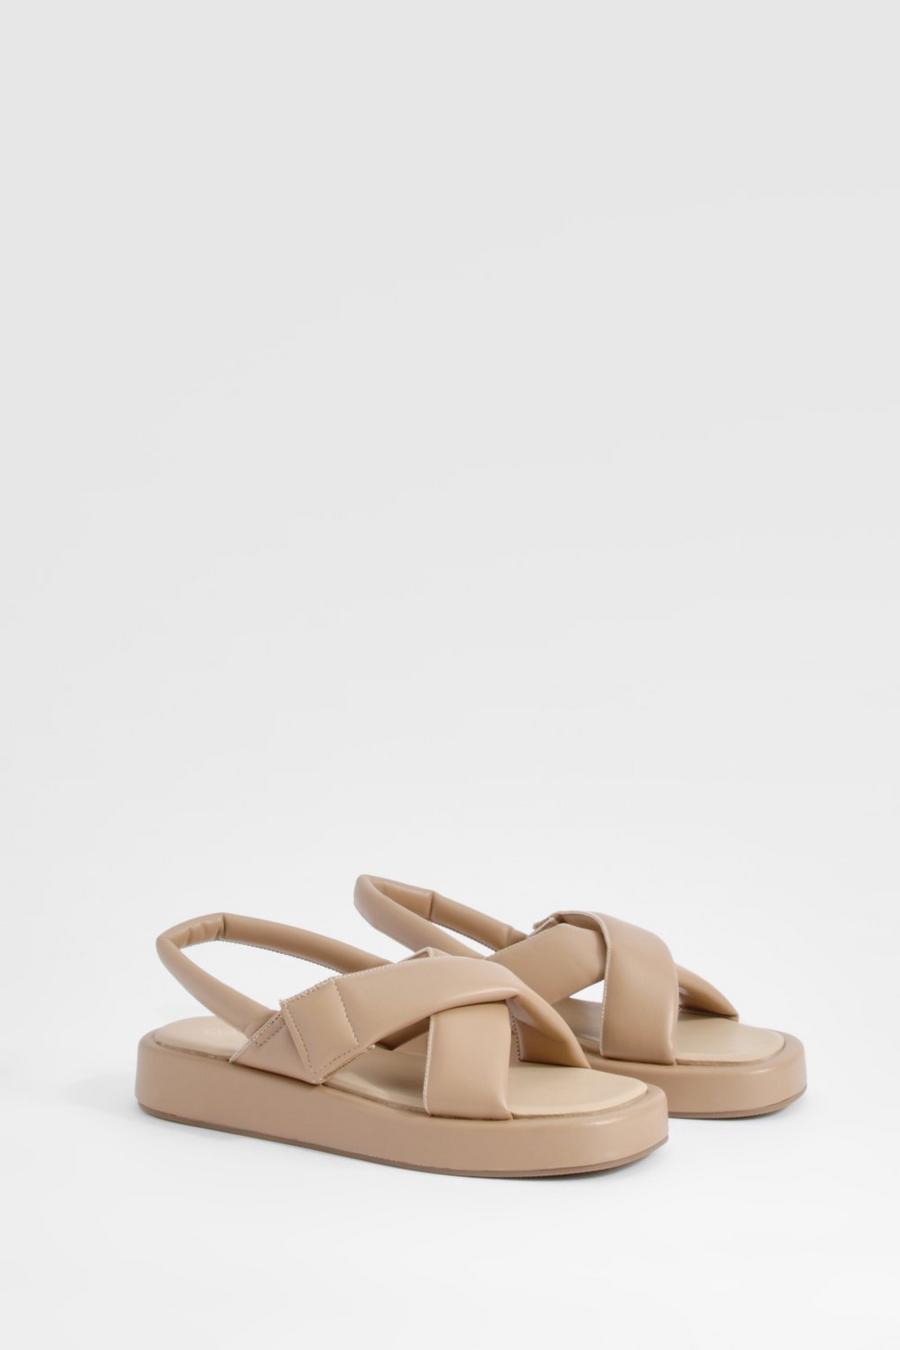 Wide Fit Sandals, Wide Fit Wedge Sandals